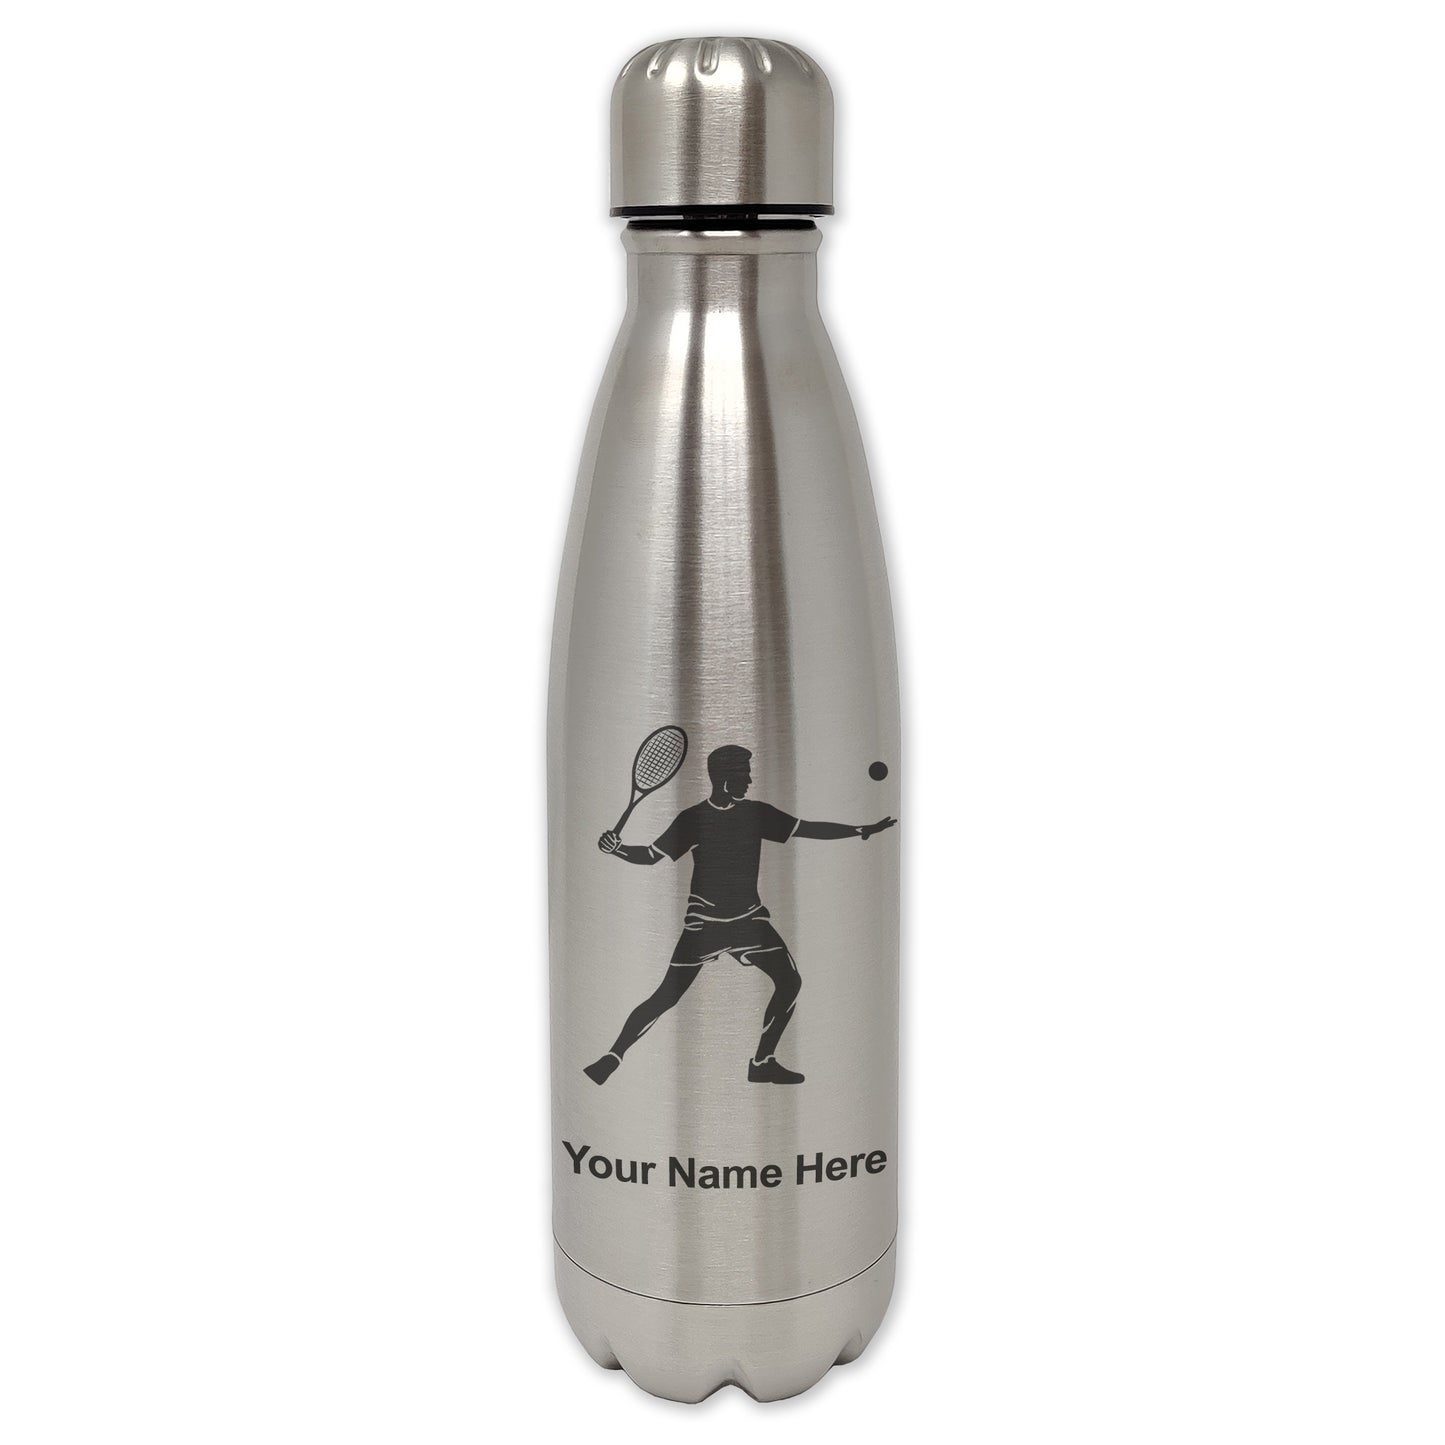 LaserGram Double Wall Water Bottle, Tennis Player Man, Personalized Engraving Included